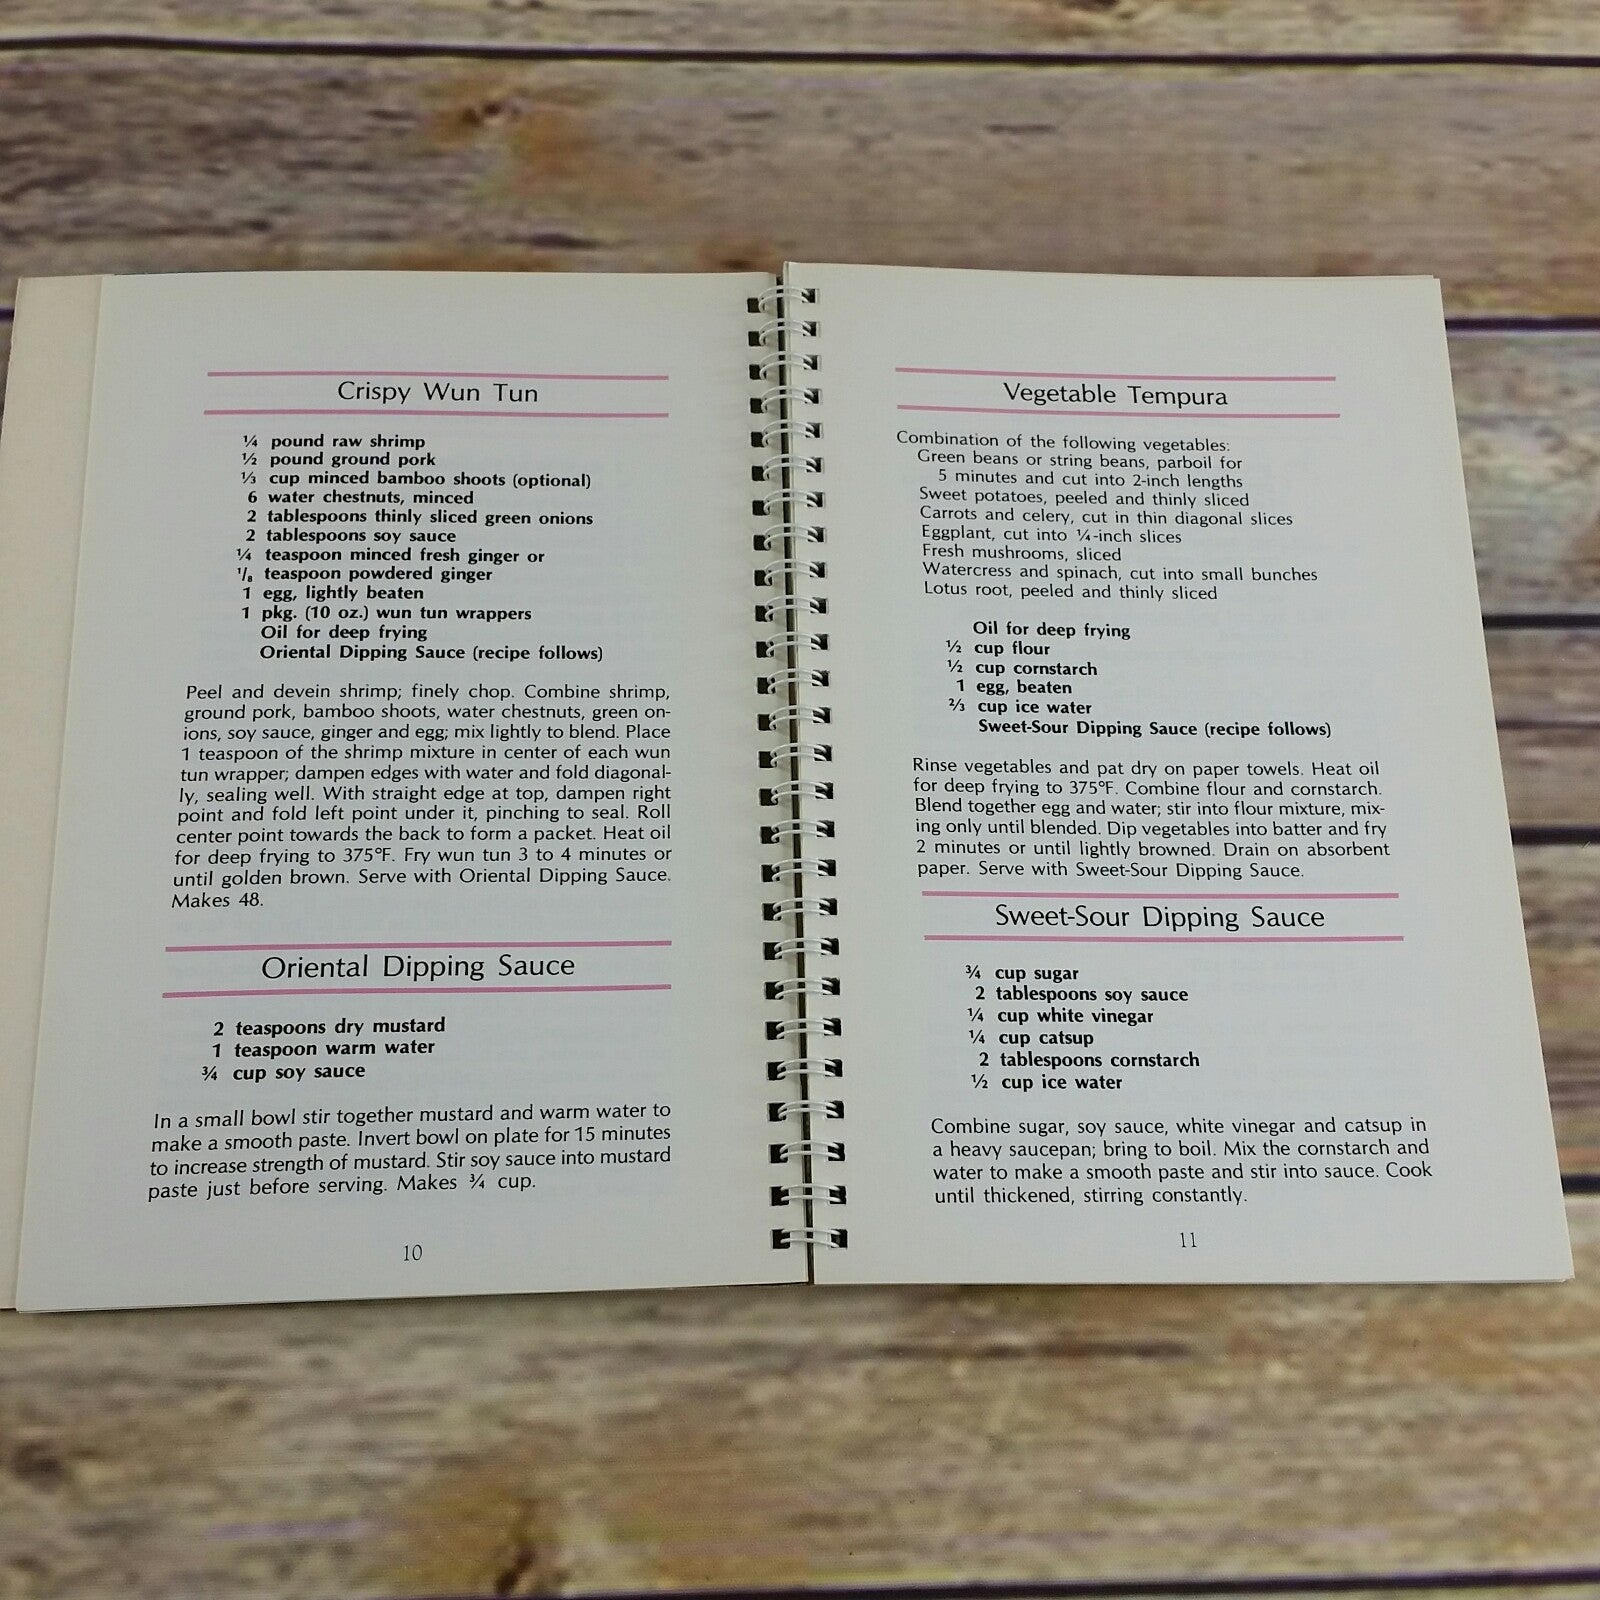 Vintage Hawaii Cookbook Favorite Recipes from Hawaii 1995 Drink Recipes Soups Salads Spiral Bound Island Heritage - At Grandma's Table